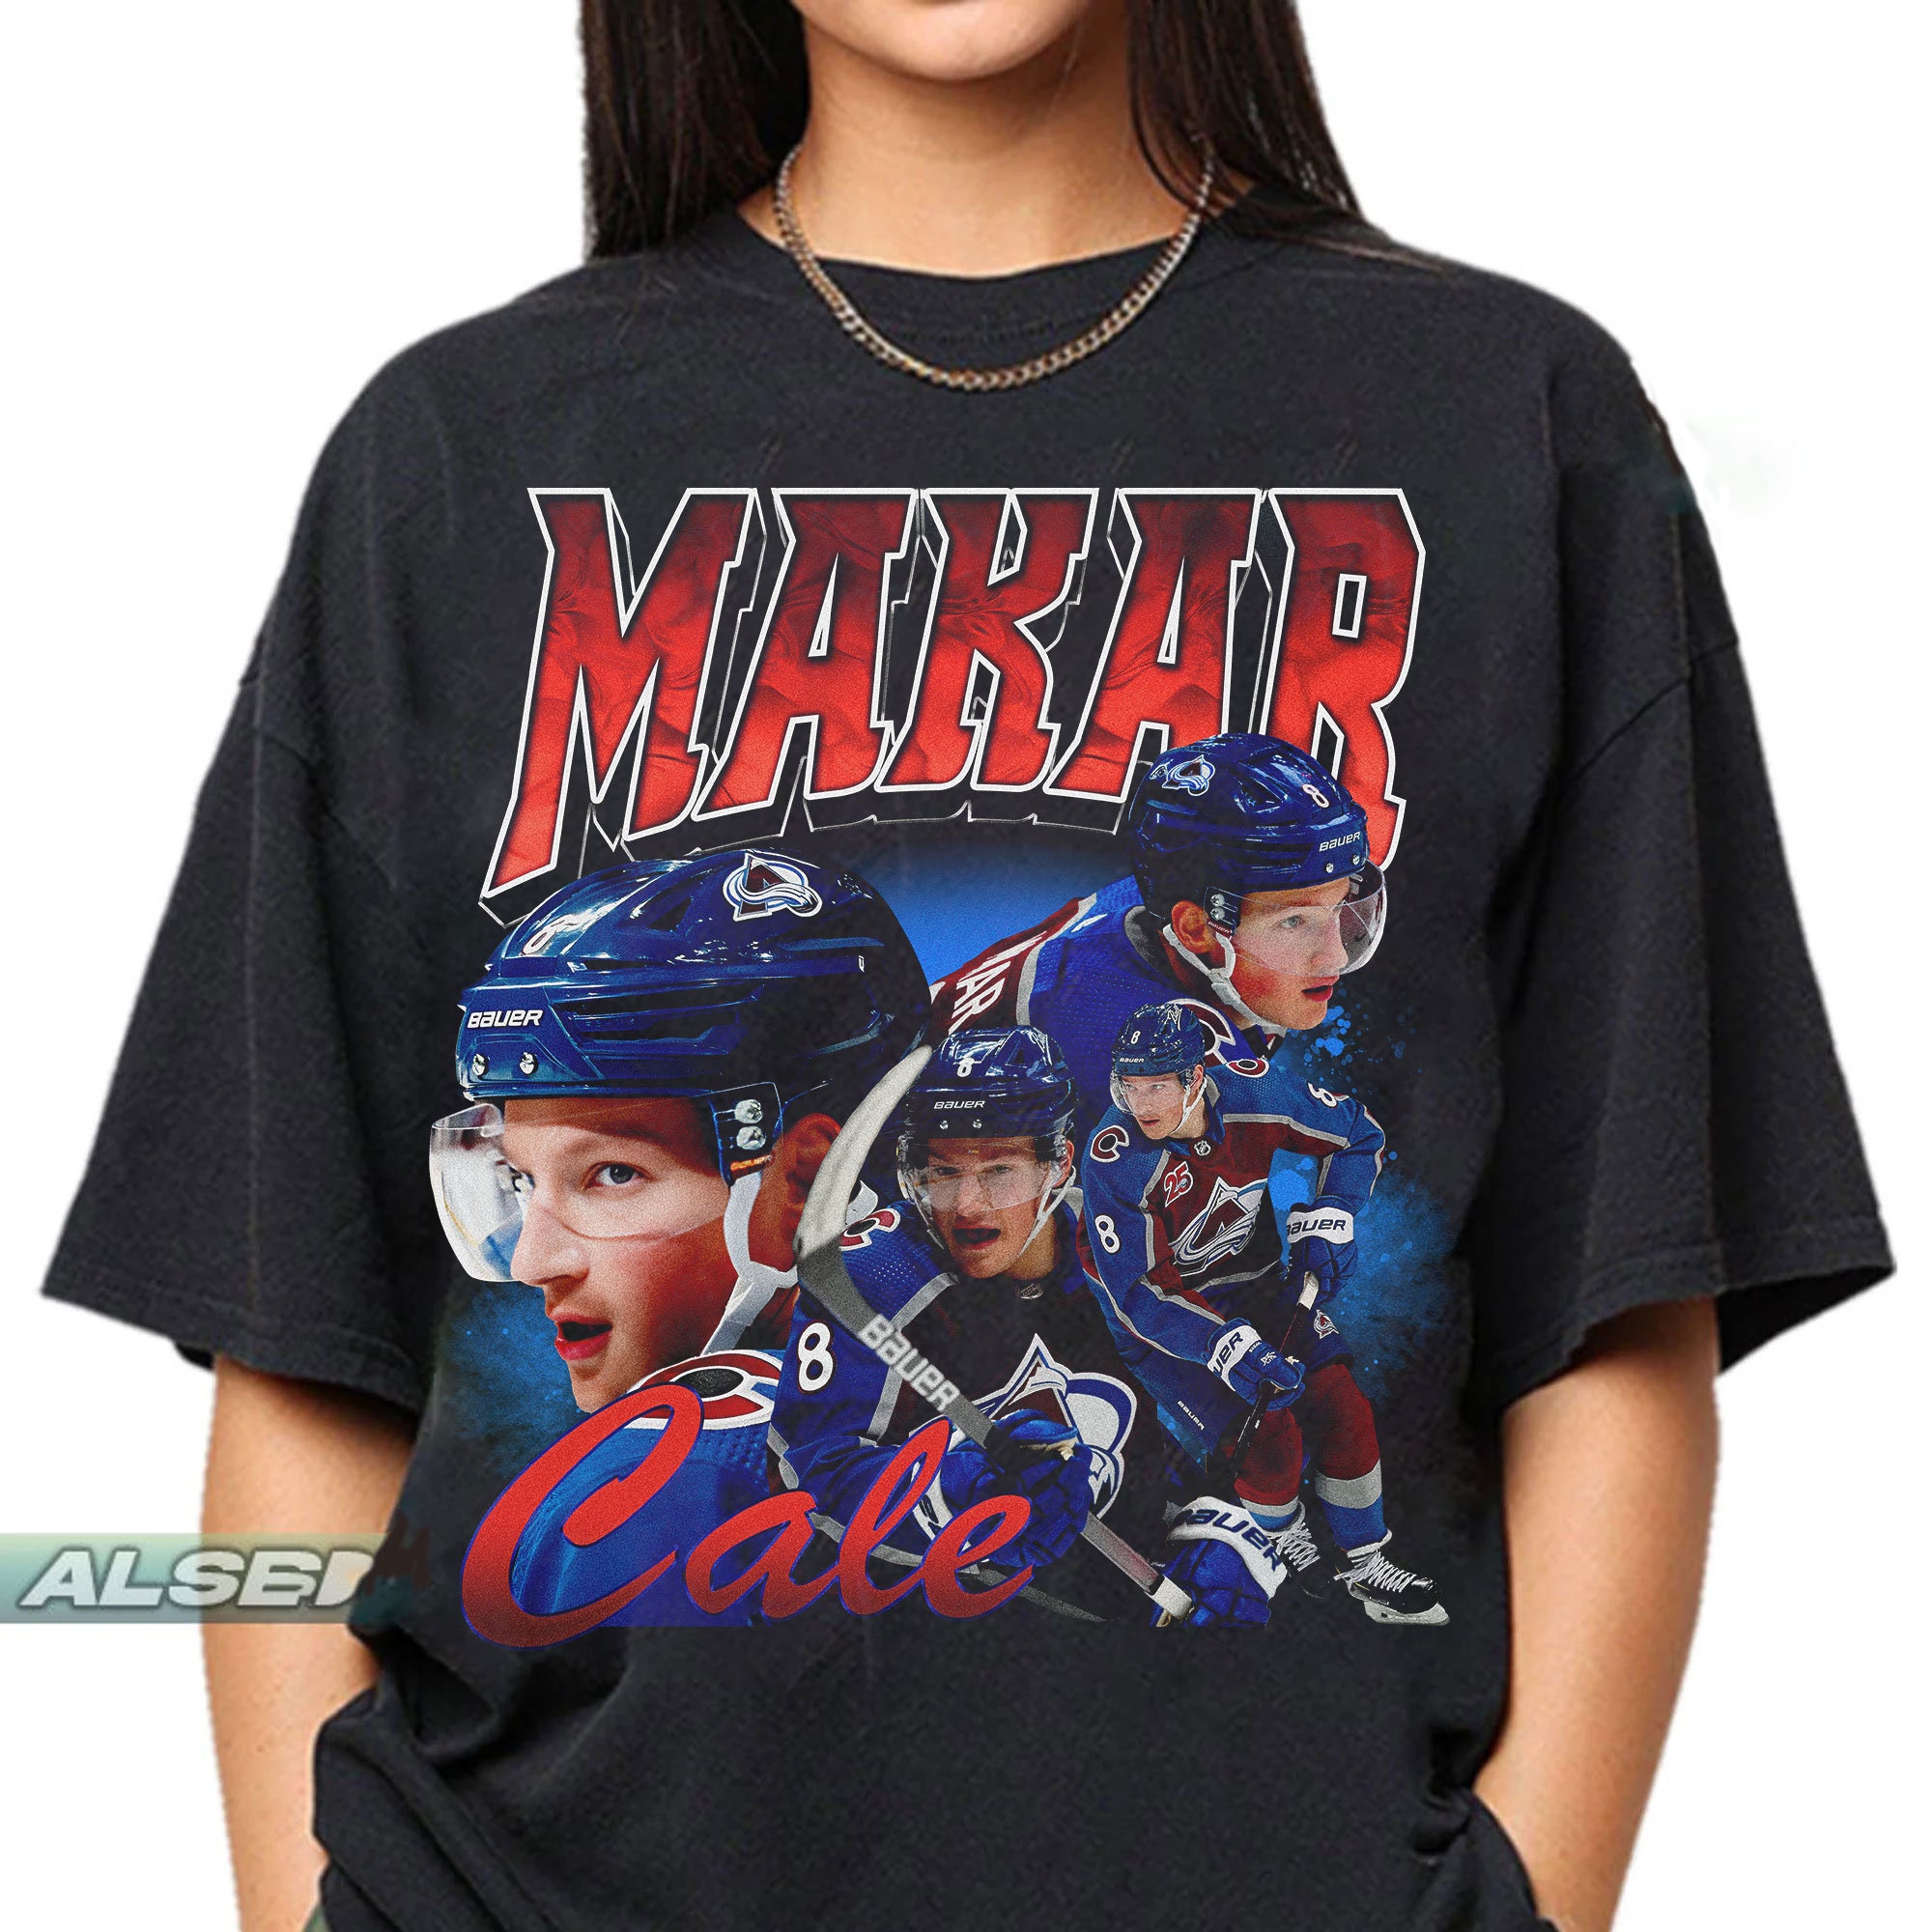 NHL Men's Colorado Avalanche Cale Makar #8 Red Player T-Shirt